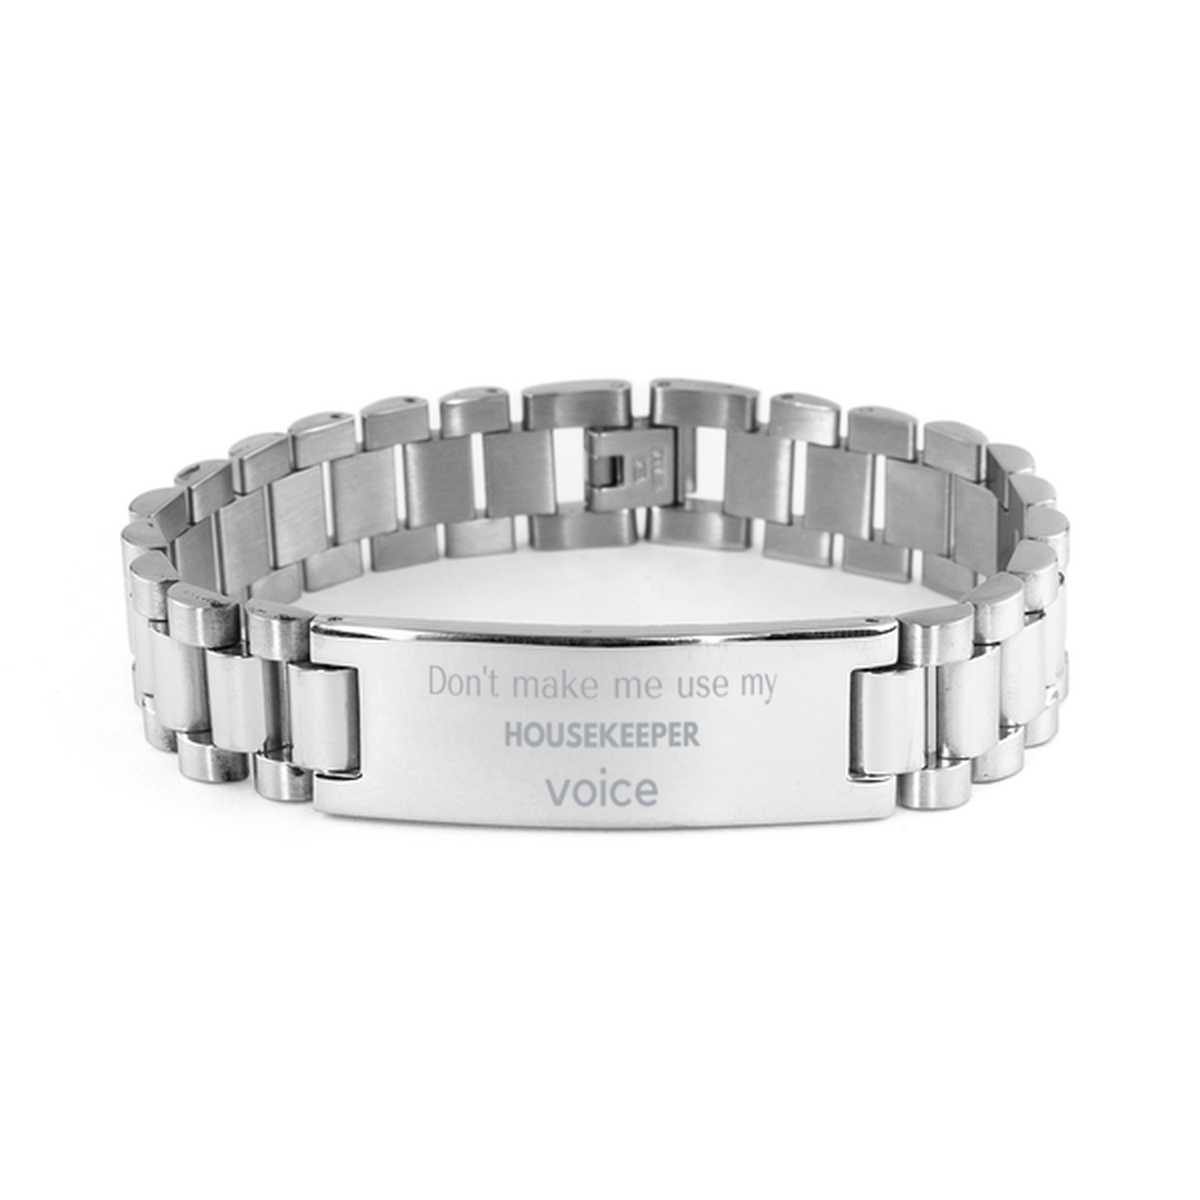 Don't make me use my Housekeeper voice, Sarcasm Housekeeper Gifts, Christmas Housekeeper Ladder Stainless Steel Bracelet Birthday Unique Gifts For Housekeeper Coworkers, Men, Women, Colleague, Friends